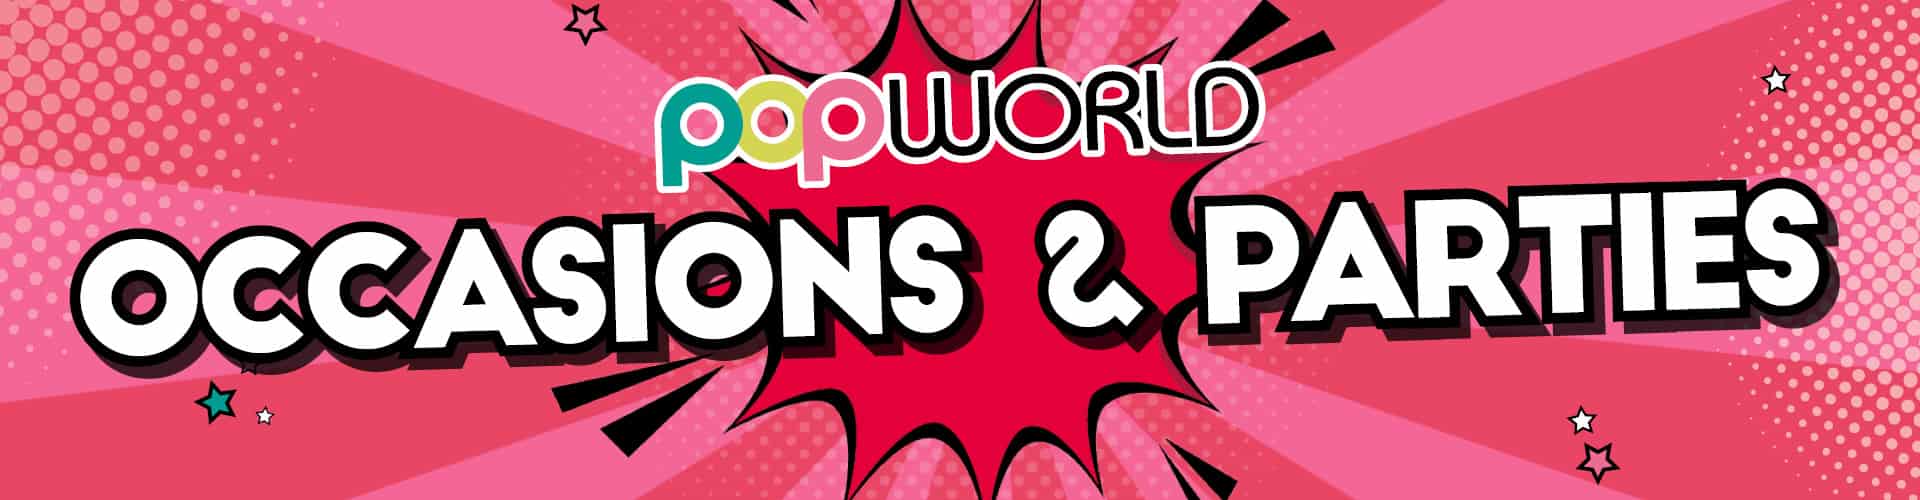 Occasions and Parties at Popworld Norwich